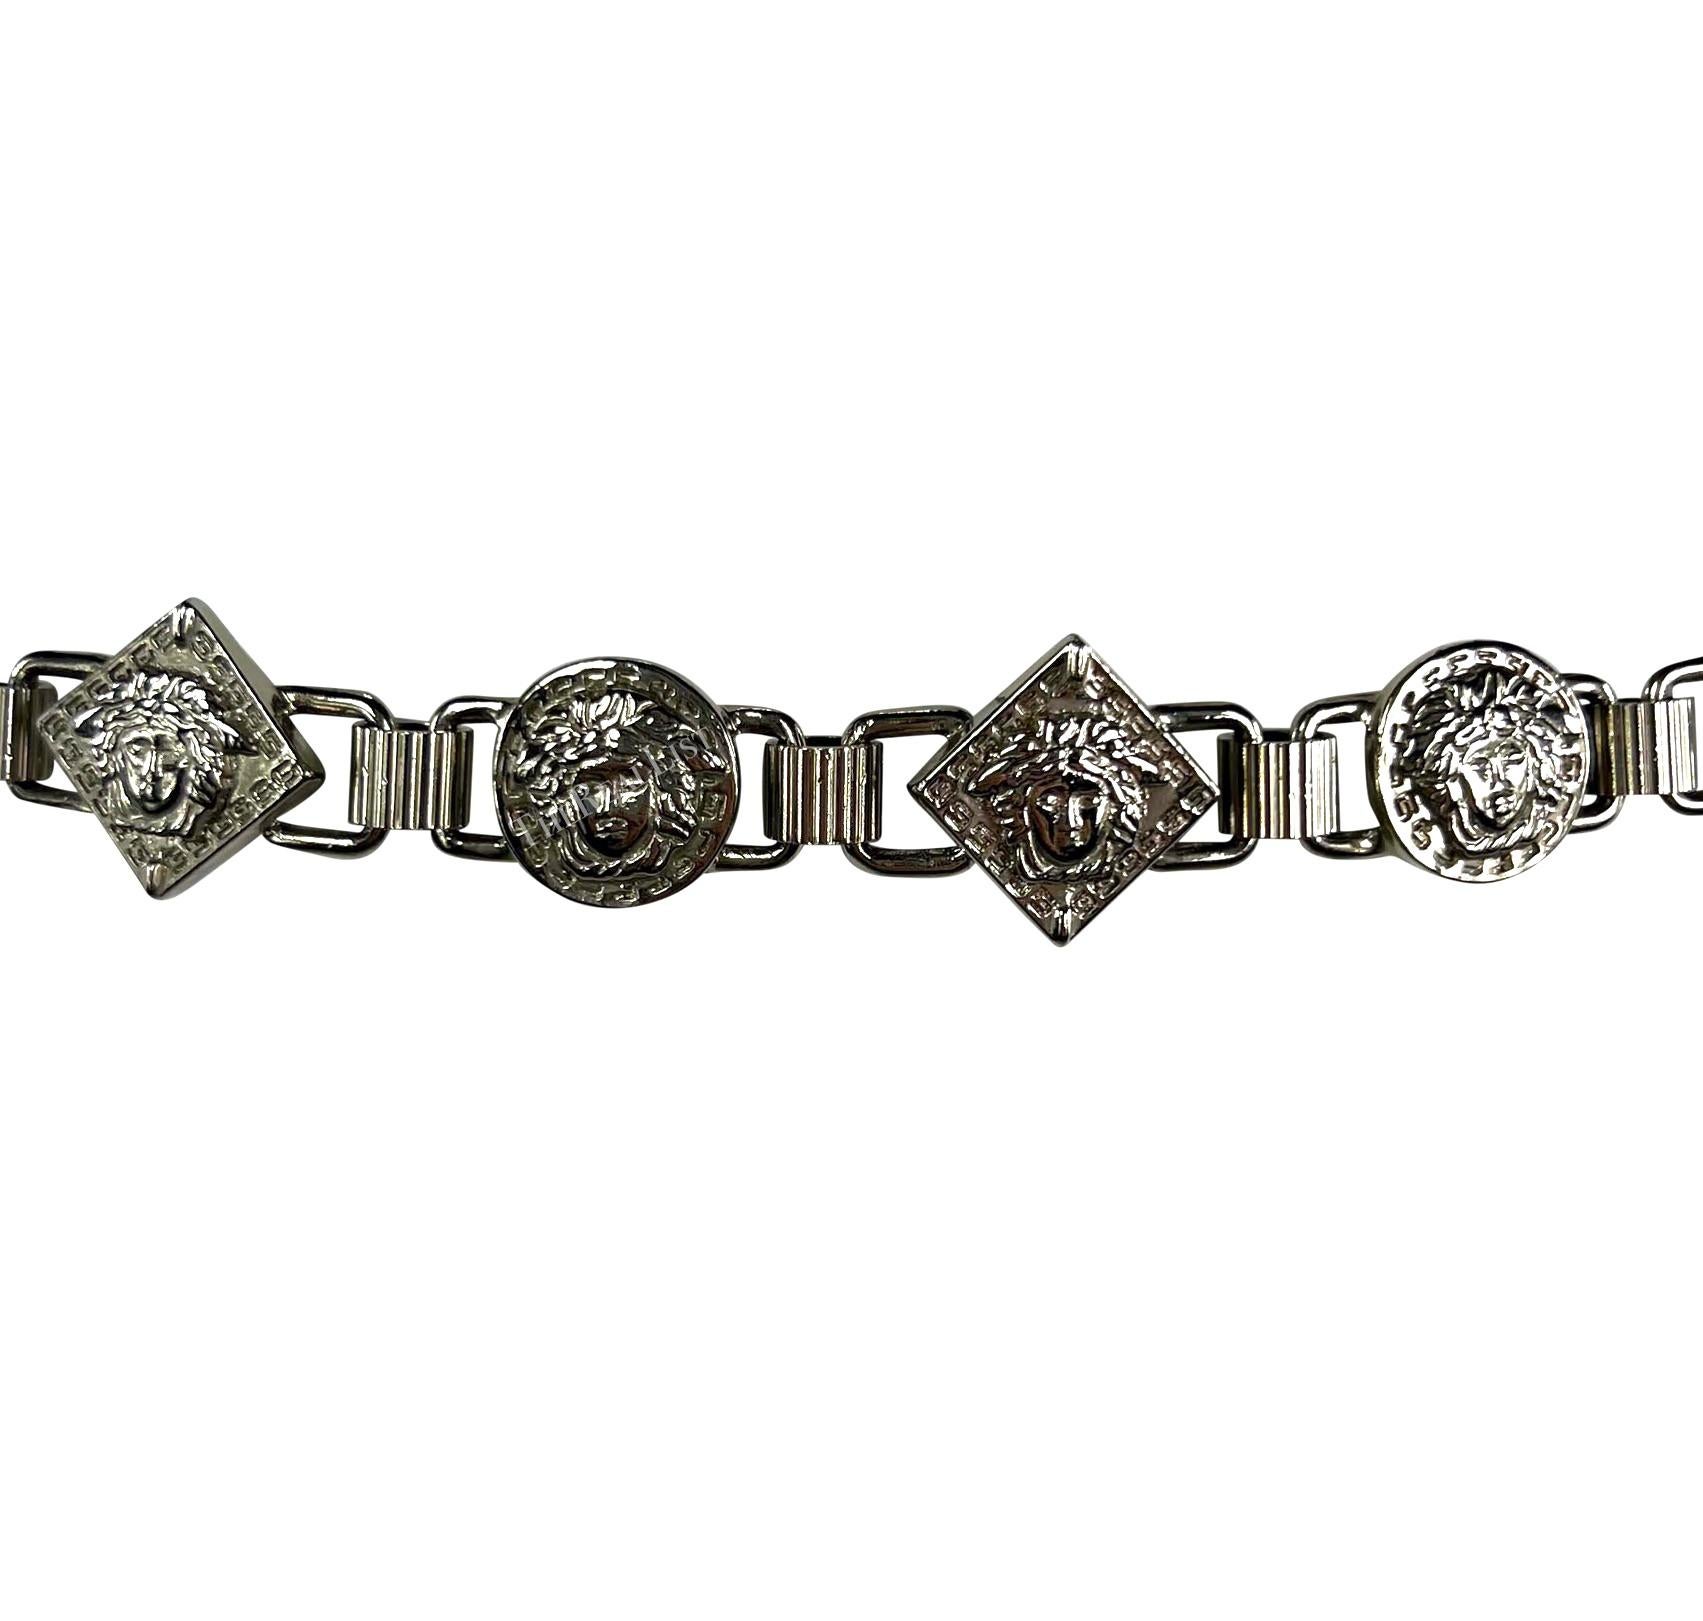 In the 1990s, Gianni Versace created this silver-tone metal belt for his eponymous label. The belt features alternating diamond and circle Medusa reliefs on a chain link design. It also includes an adjustable chain that hangs to one side, adorned